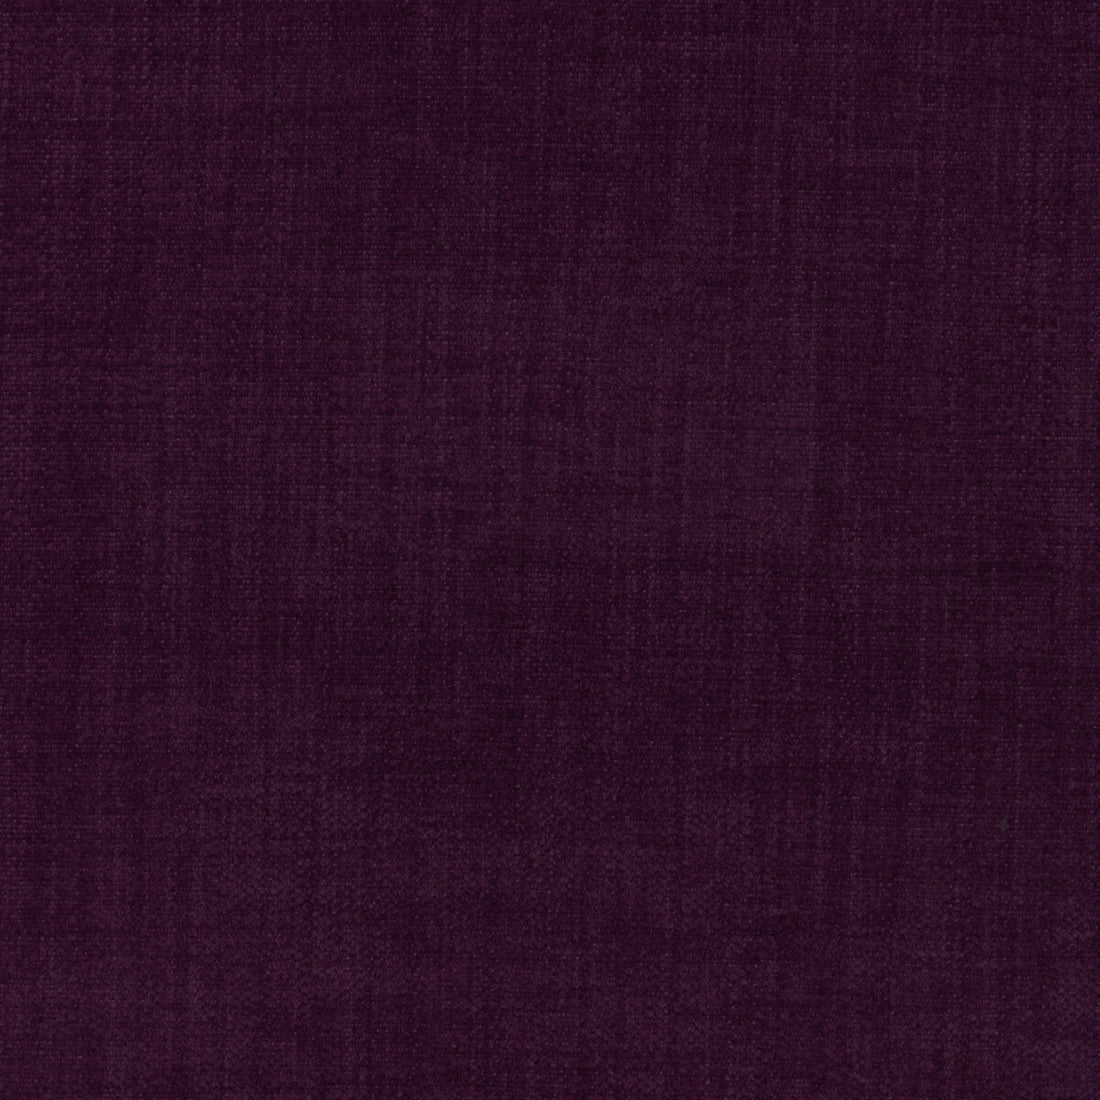 Accommodate fabric in mulberry color - pattern 36255.10.0 - by Kravet Contract in the Supreen collection